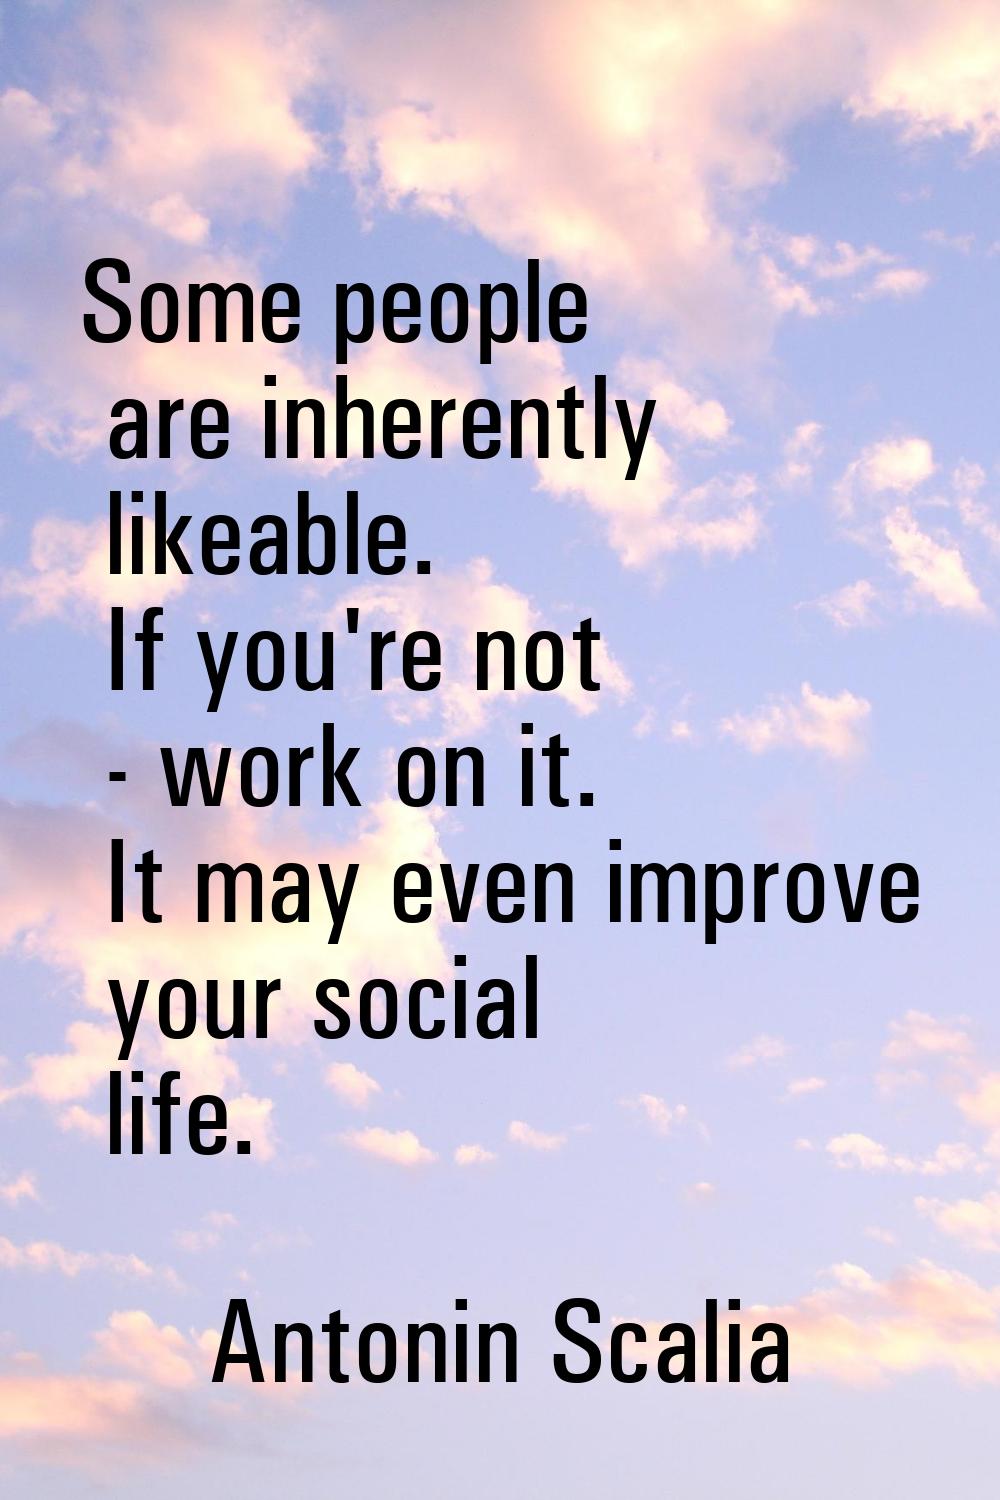 Some people are inherently likeable. If you're not - work on it. It may even improve your social li